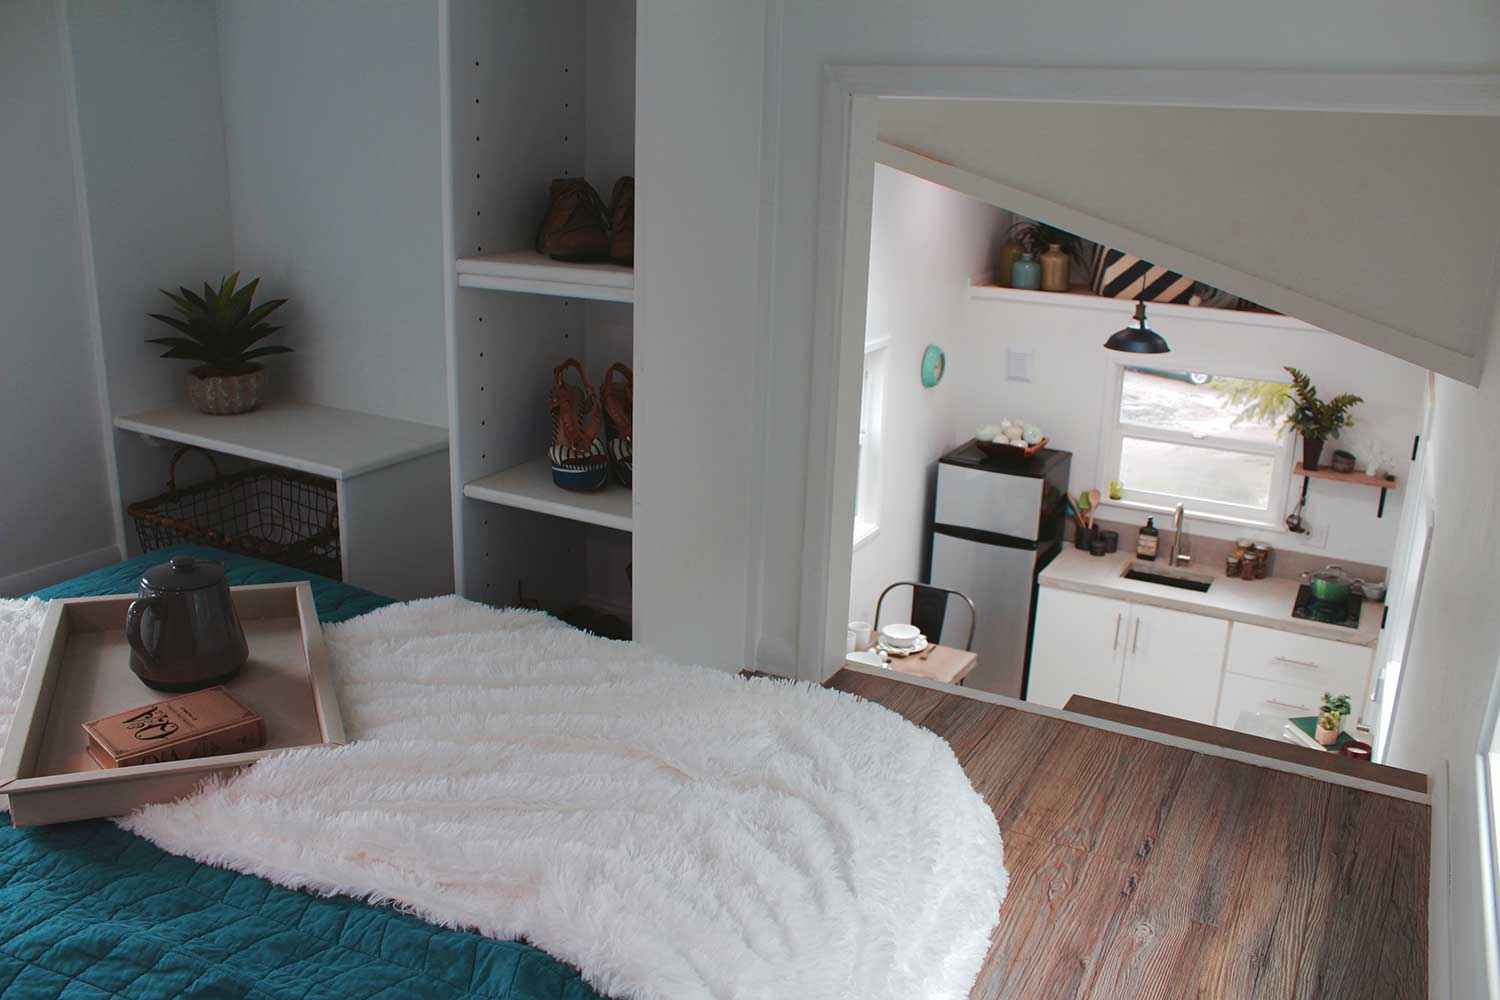 Loft. bedroom in the Midcentury Modern Tiny Home